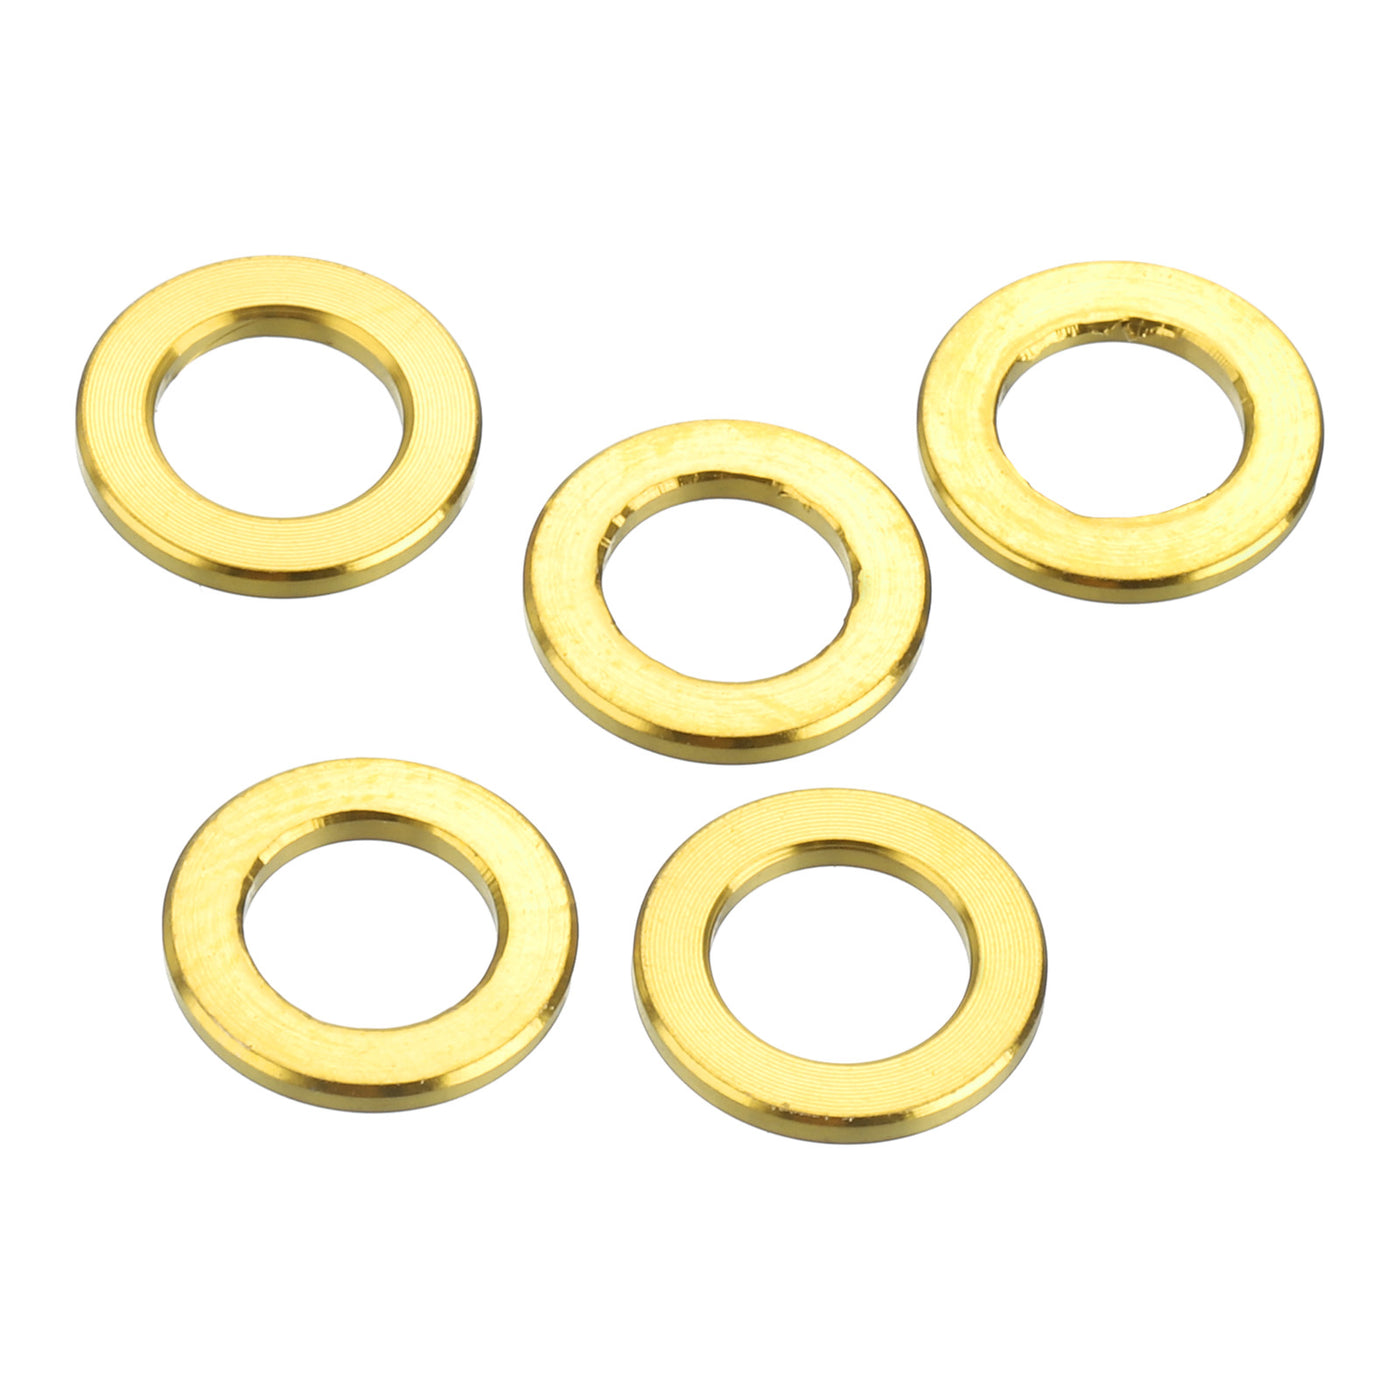 uxcell Uxcell 5 Pcs M5 Titanium Flat Washer Metric Flat Washer Gold